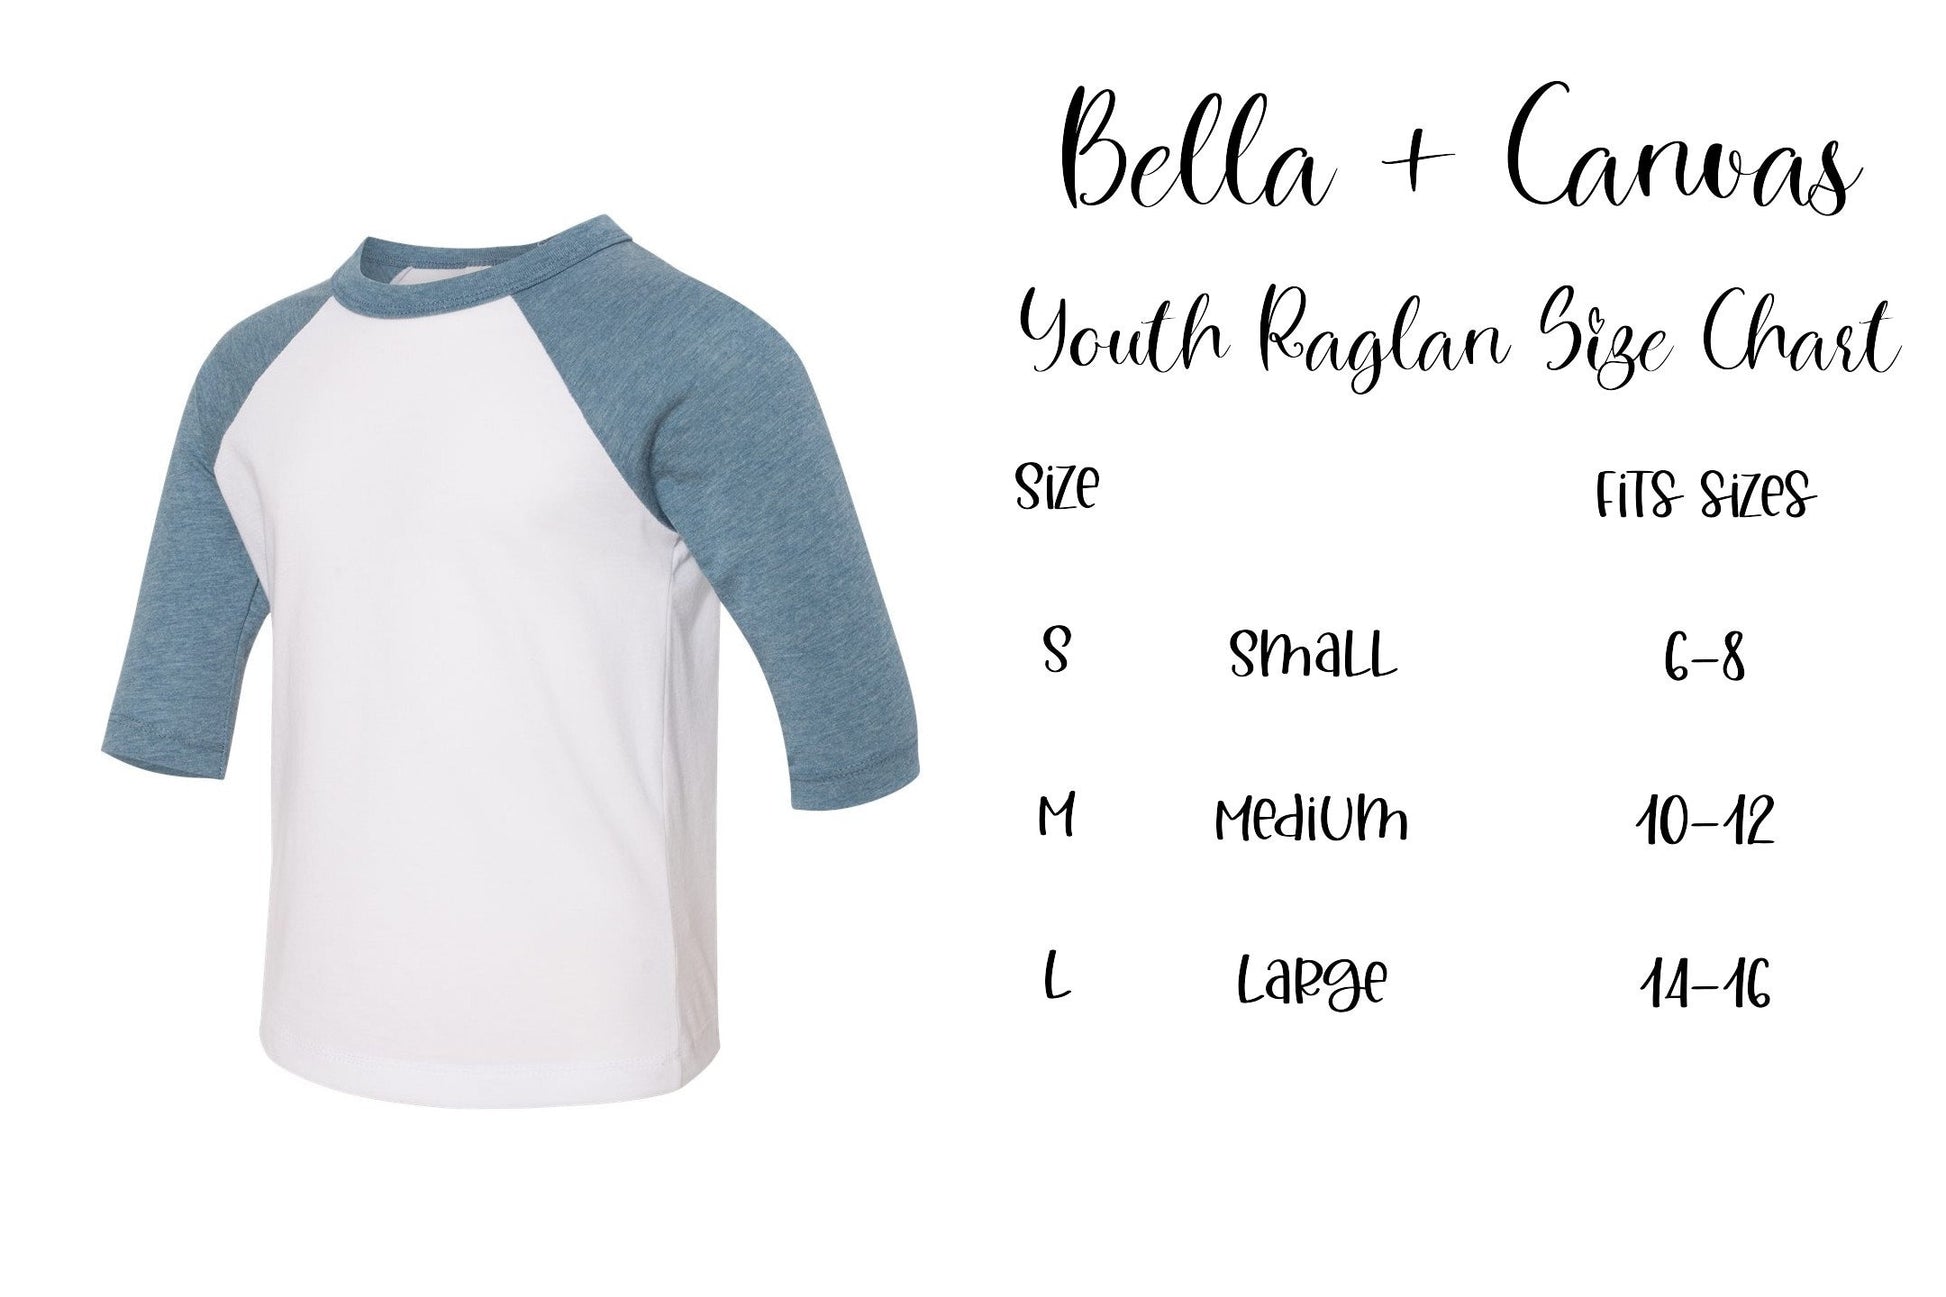 I'm Going to be a Big Brother or Big Sister Toddler or Kids Bella + Canvas Raglan Tee - pregnancy announcement - big brother sister tee